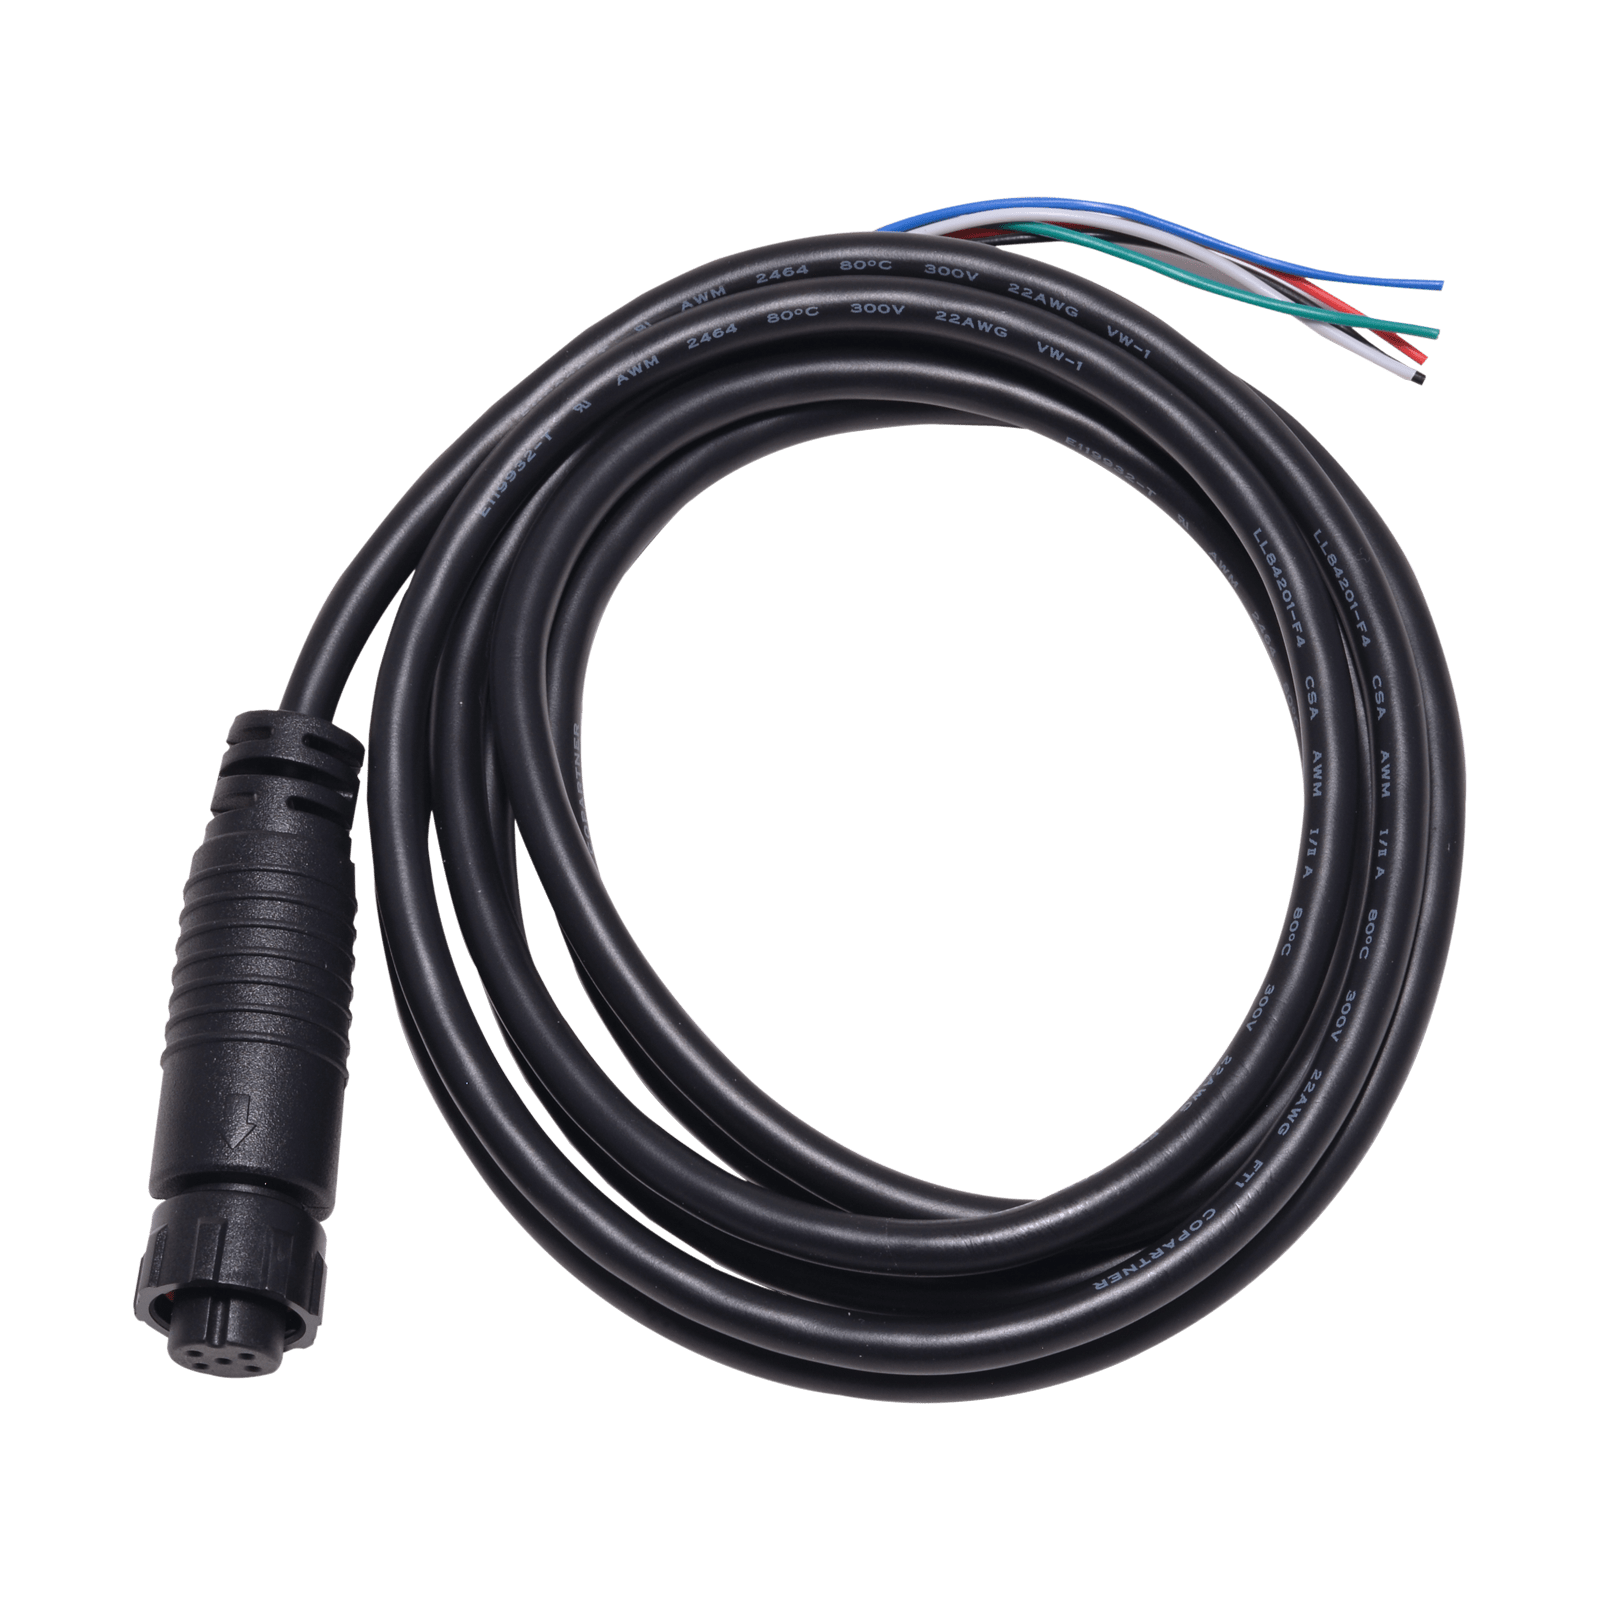 POWER / DATA CABLE